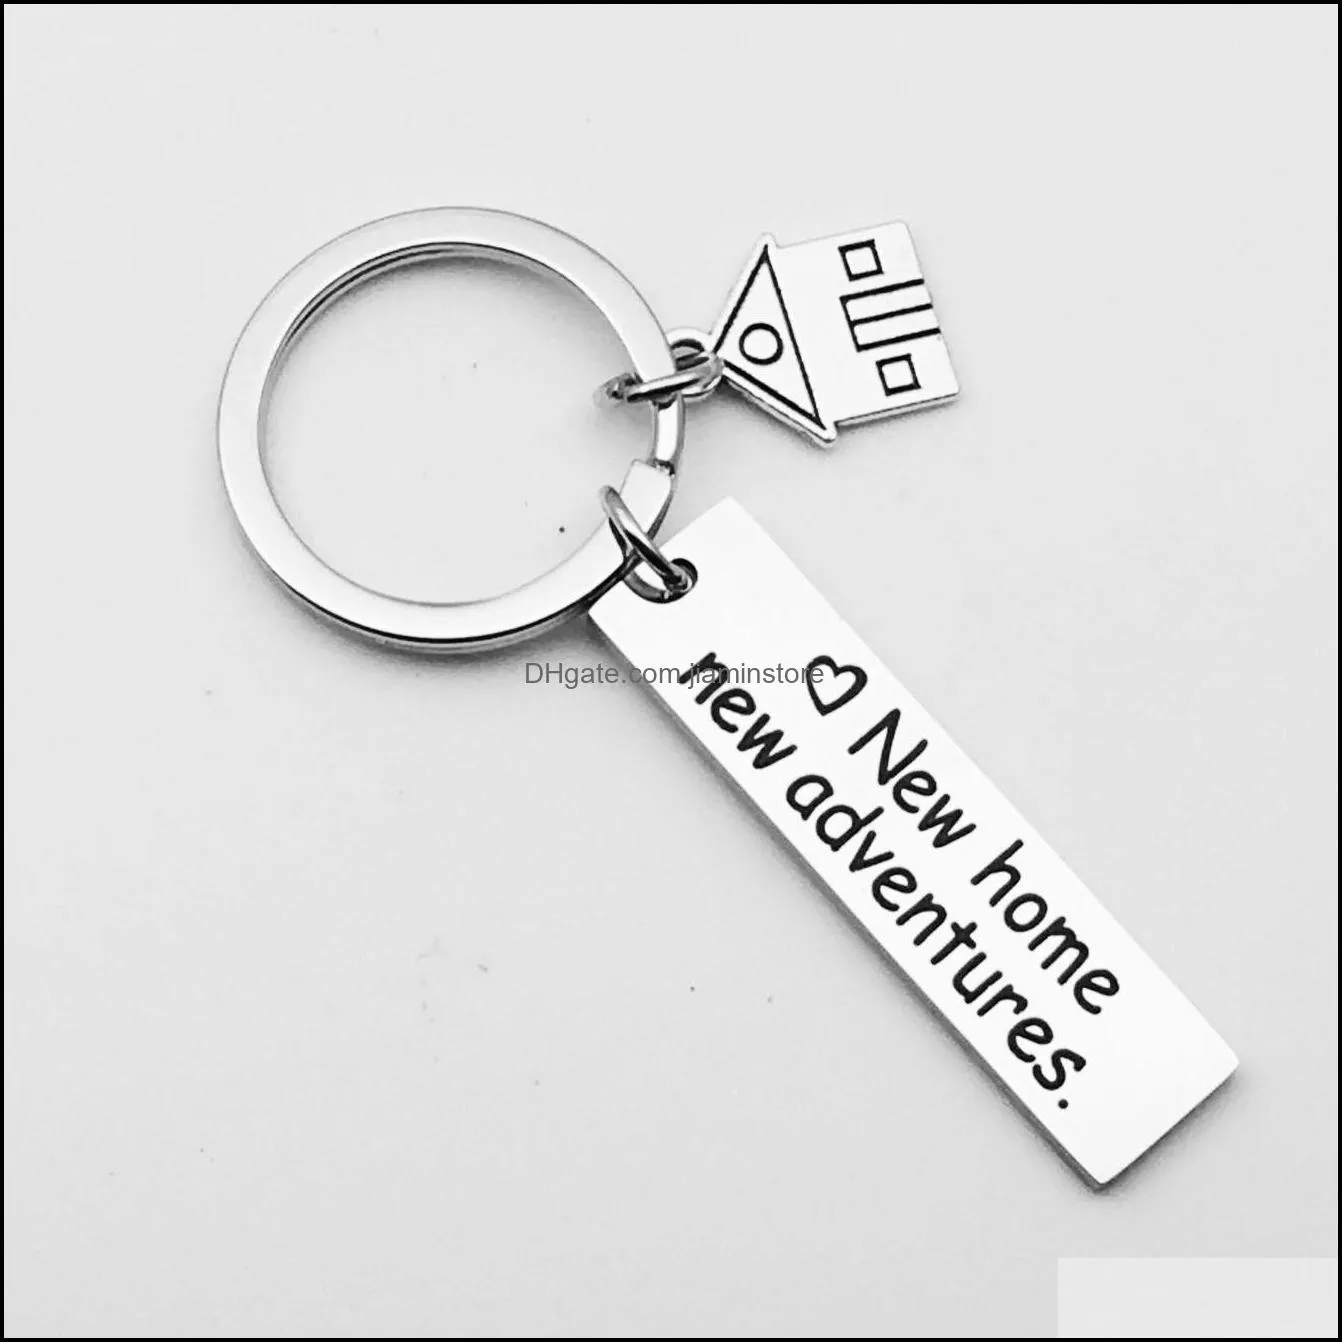 Home New Adventures Keychains Letters Key ring Housewarming Gift Realtor Closing Jewelry Sweet House